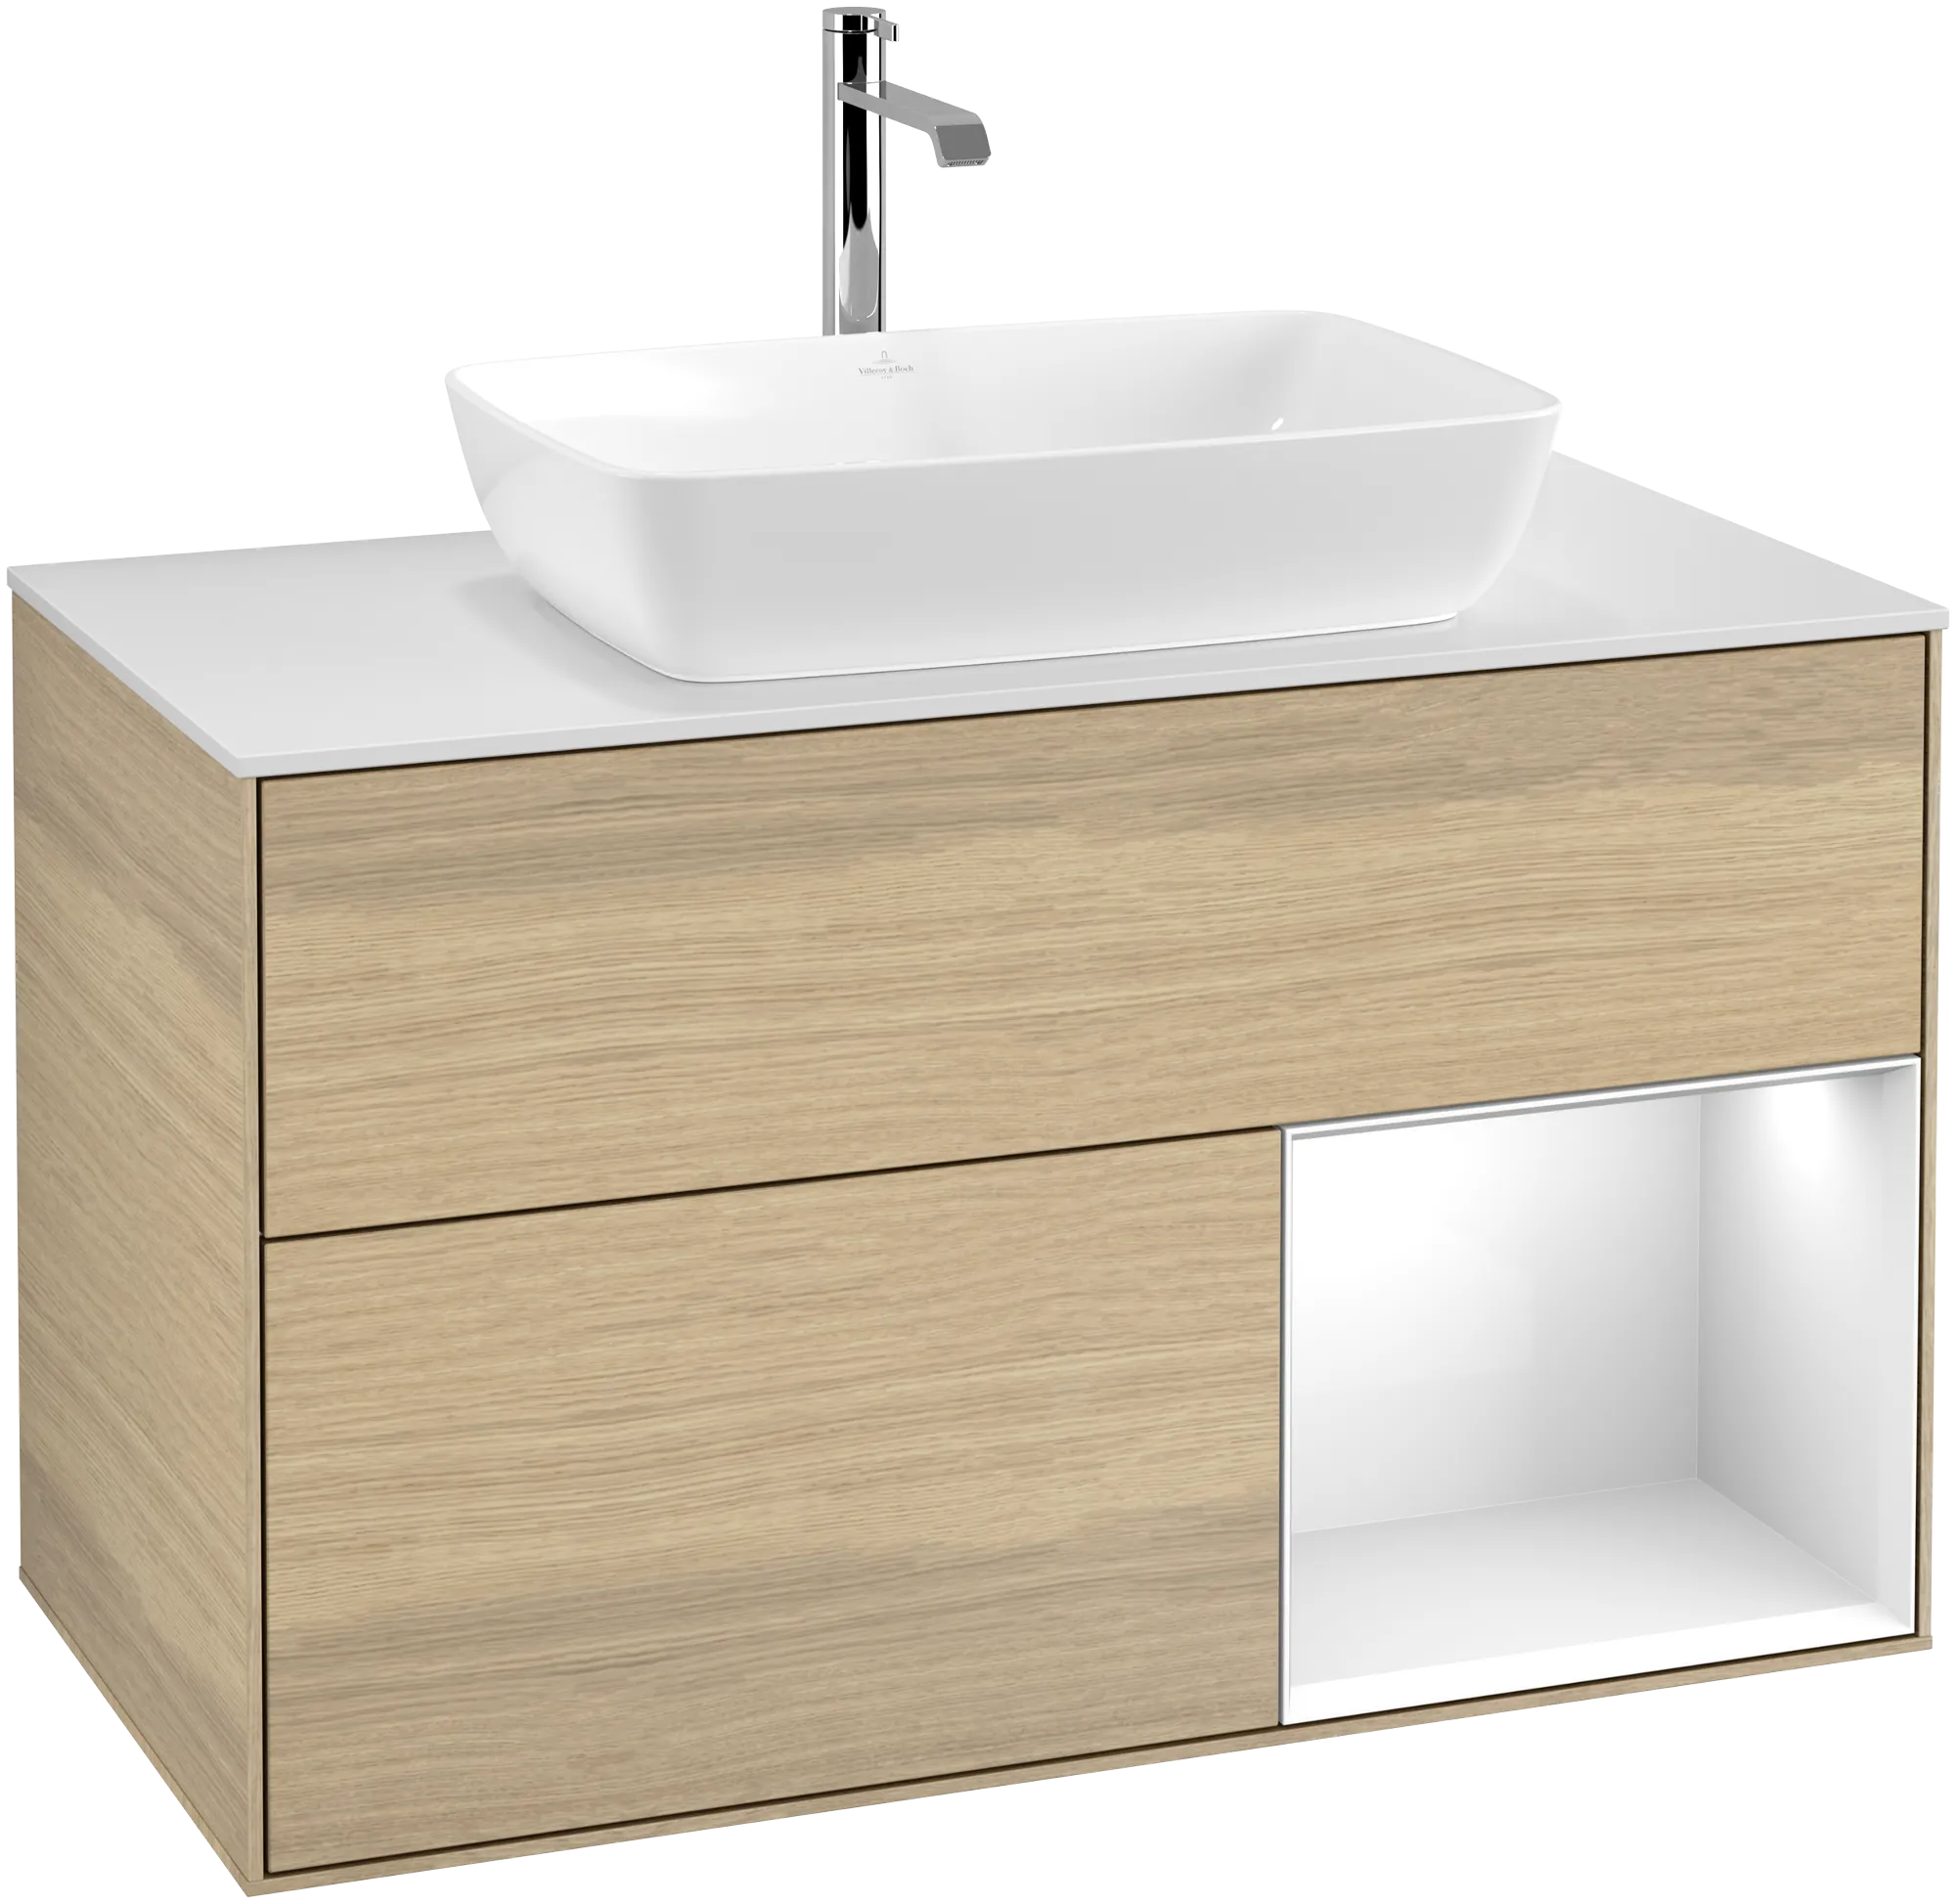 VILLEROY BOCH Finion Vanity unit, with lighting, 2 pull-out compartments, 1000 x 603 x 501 mm, Oak Veneer / Glossy White Lacquer / Glass White Matt #G781GFPC resmi